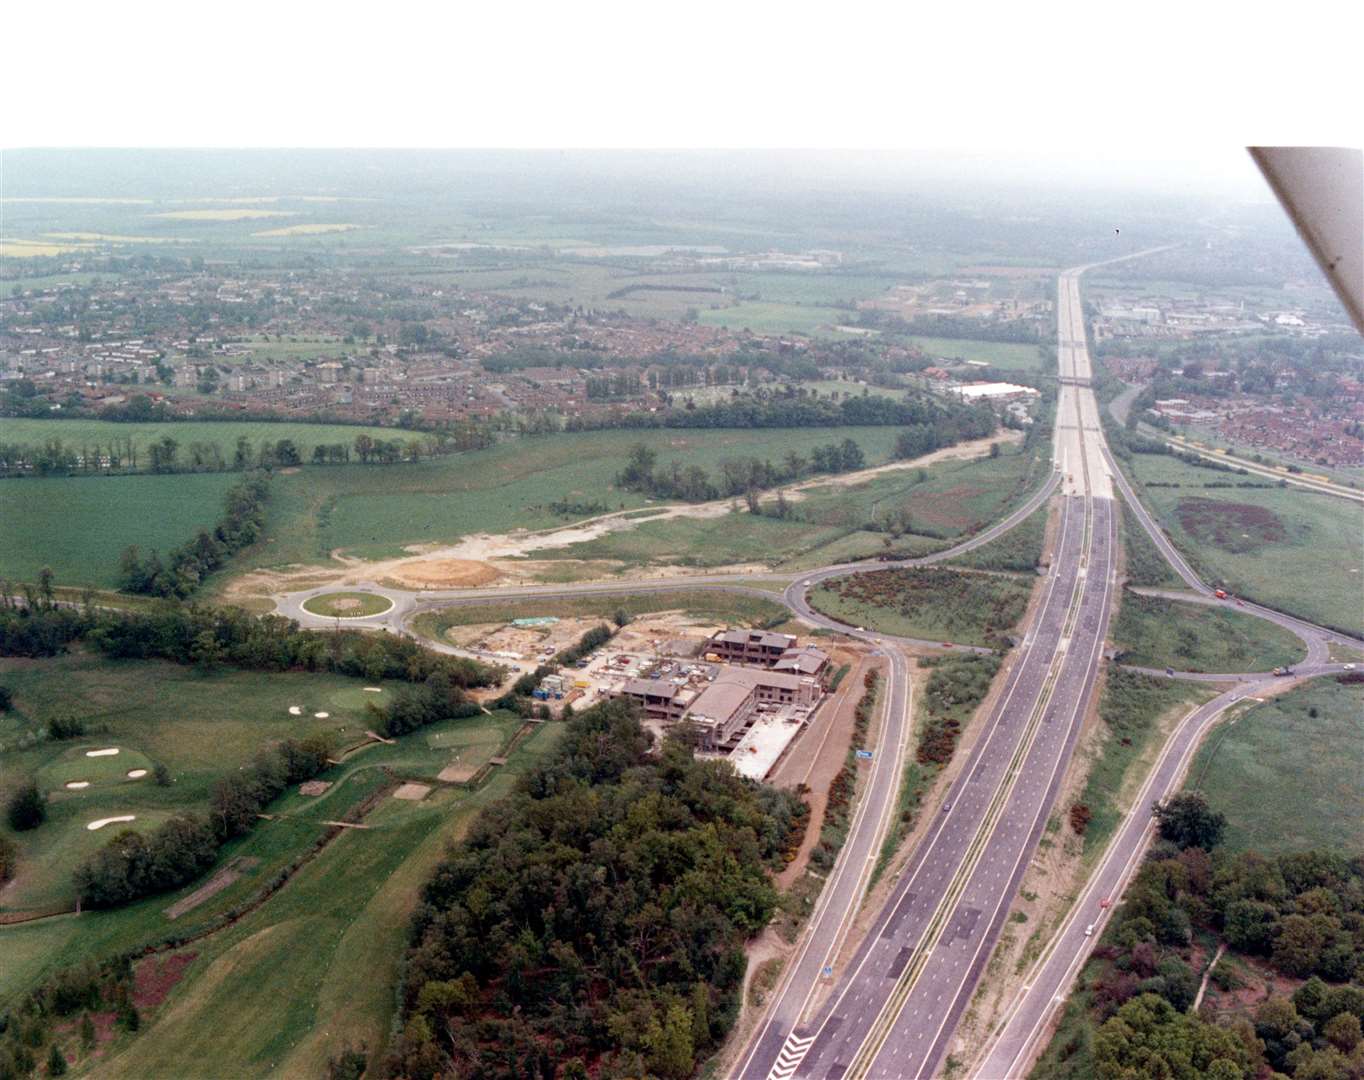 Looking coastbound down the M20 at Junction 9 for Ashford in 1991. The golf course is to the bottom left, while Eureka Leisure Park - boasting a Cineworld, hotels, and a range of restaurants - is yet to be built. The suburbs of Bybrook and Kennington can be seen to the left. Pic: Steve Salter